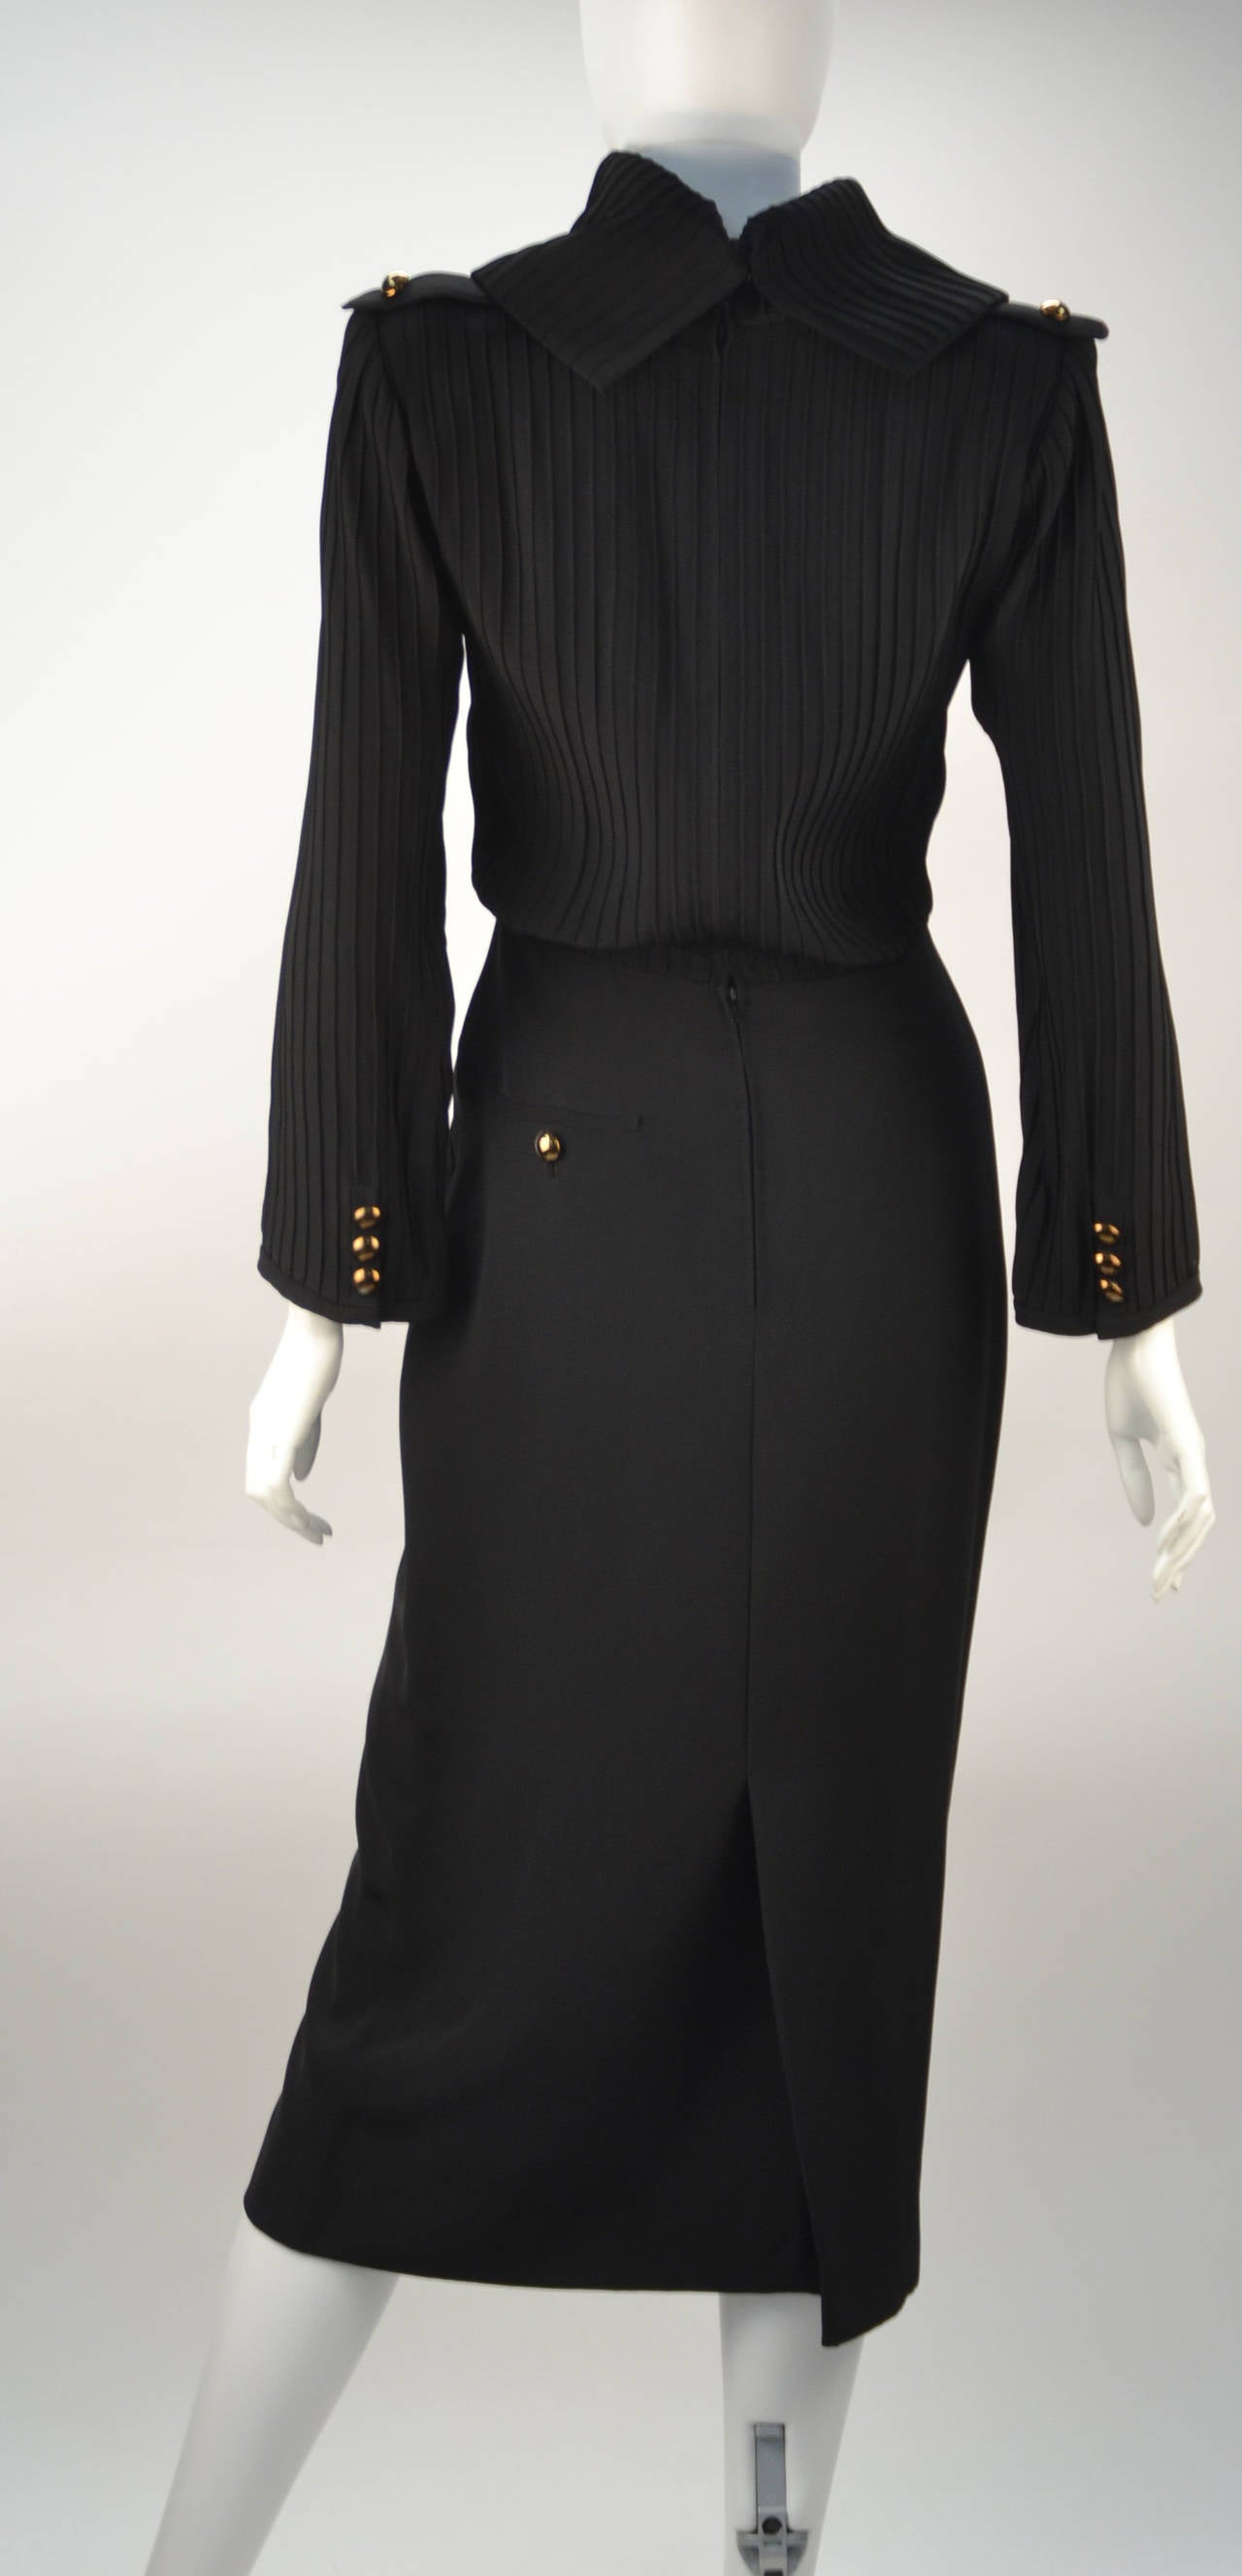 Early Louis Feraud combines both elegance and power. This beauty is comprised of a blousson top with large back pointed cowl neckline and a 